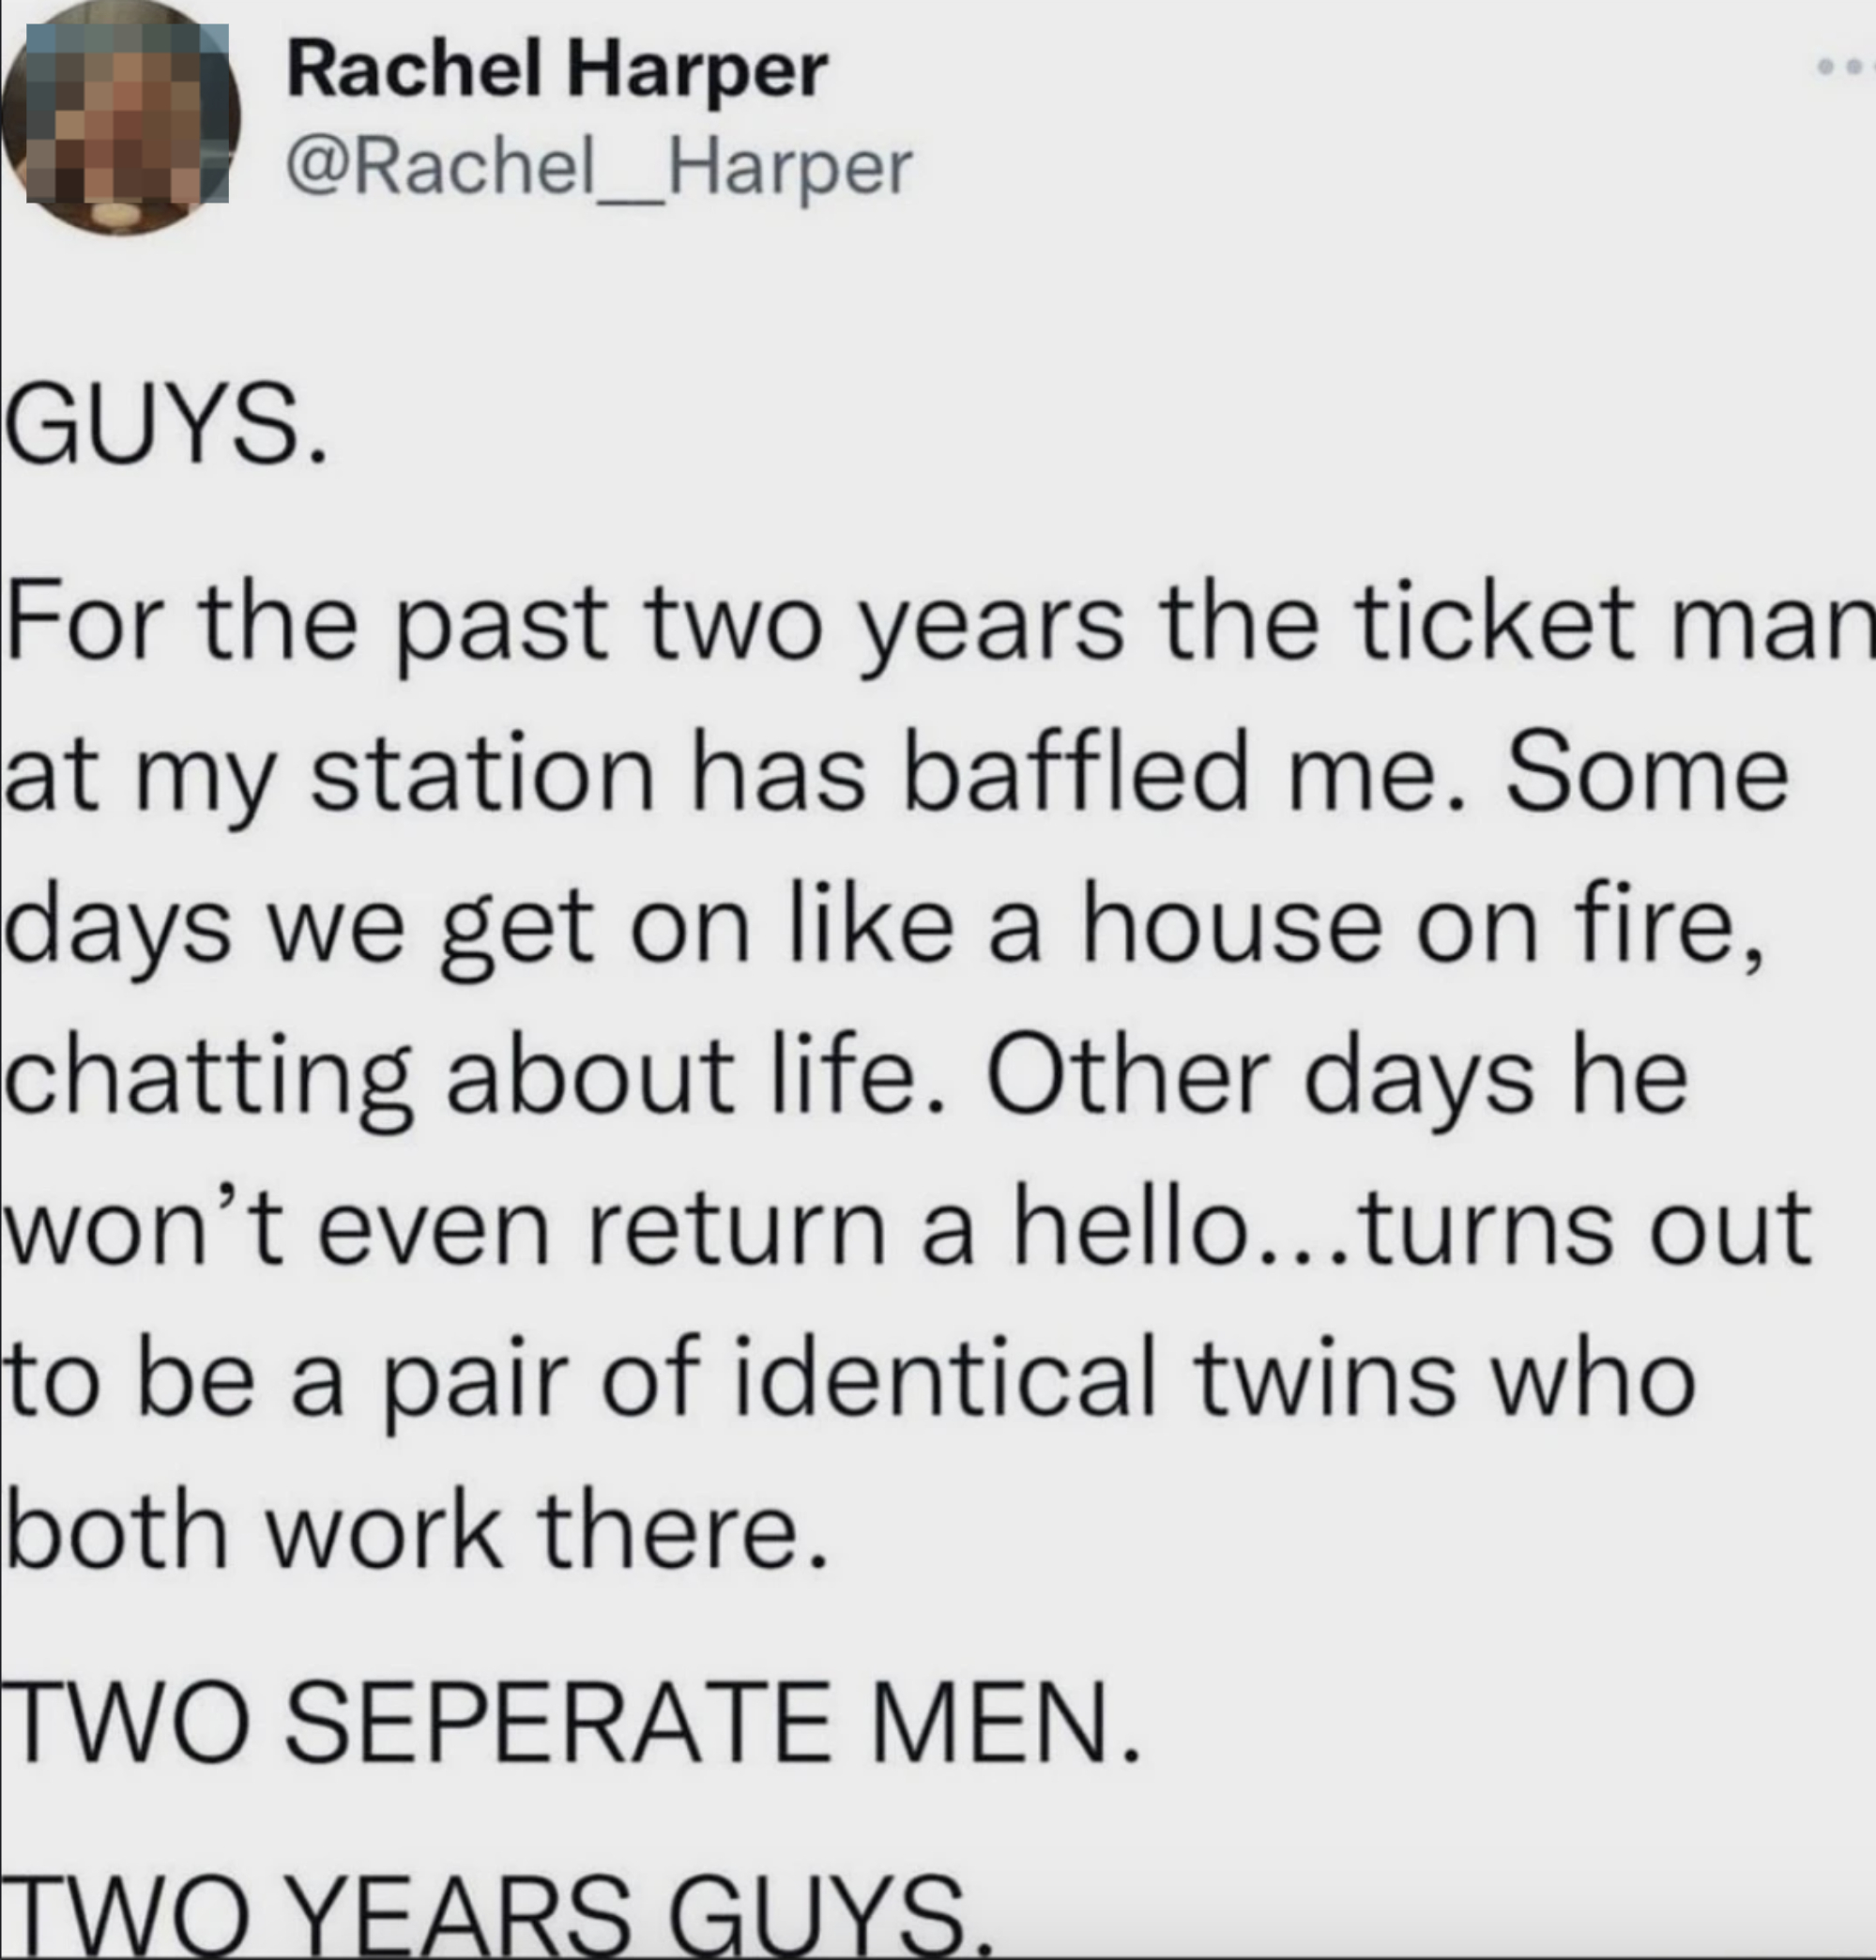 Tweet by Rachel Harper expressing surprise about finding out that two men she knows are identical twins